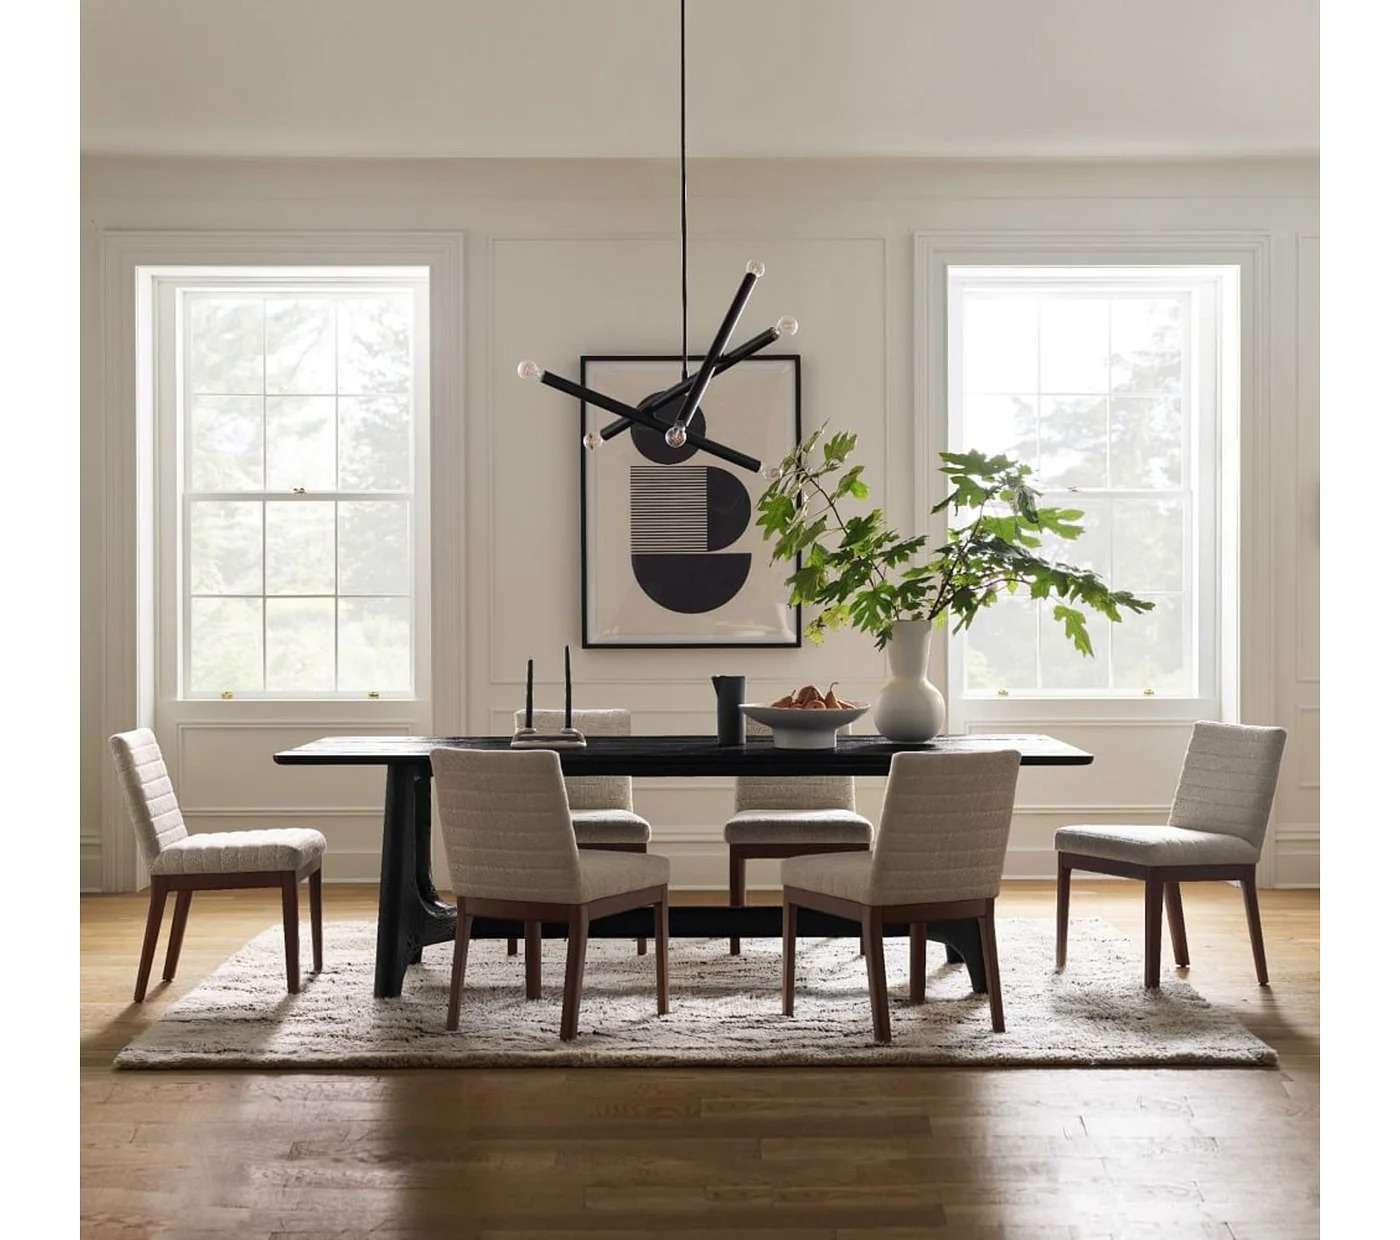 Id-Century Expandable Dining Table